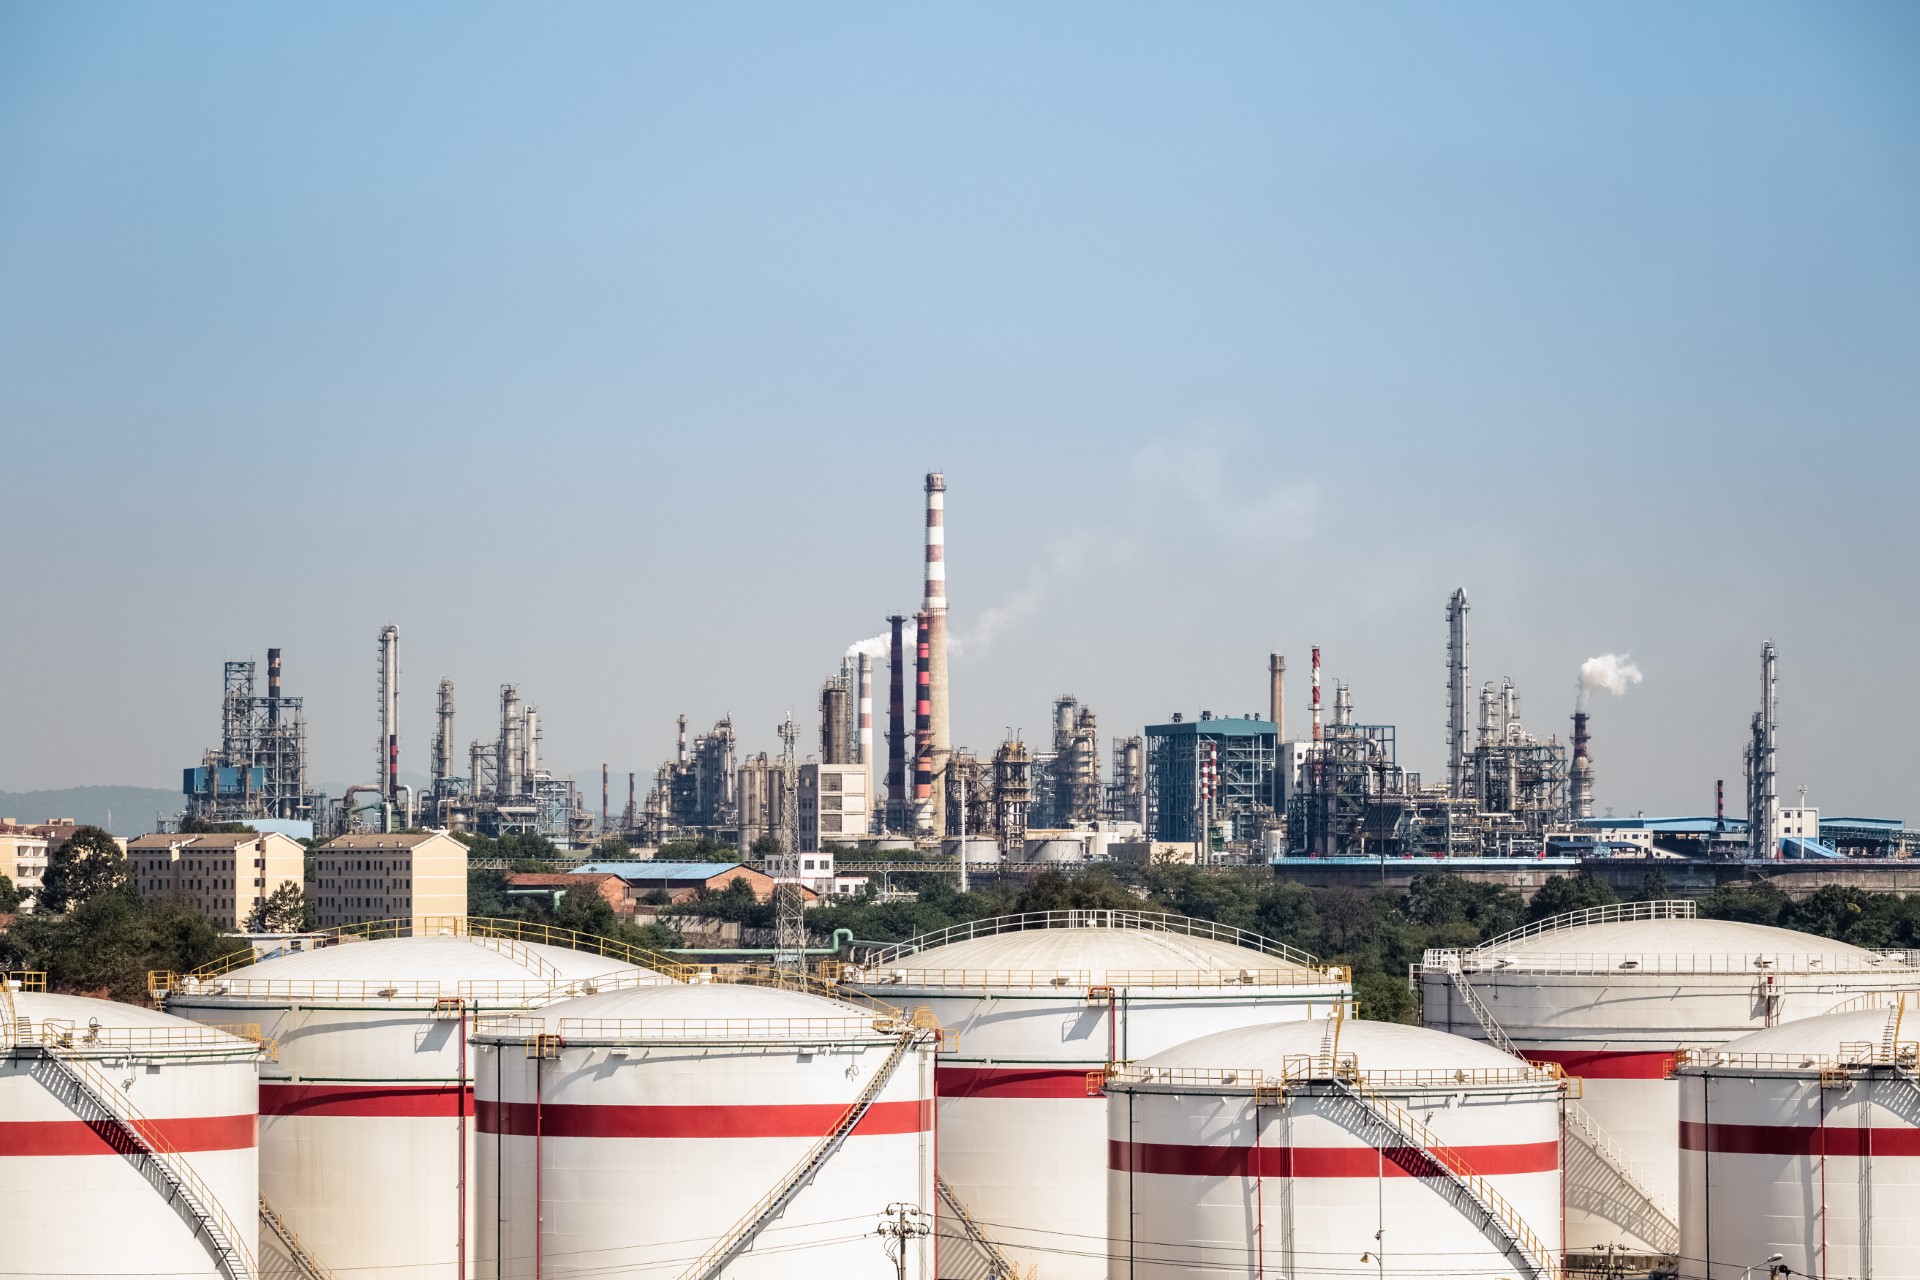 petrochemical complex and storage tanks, industrial landscape of oil refinery factory